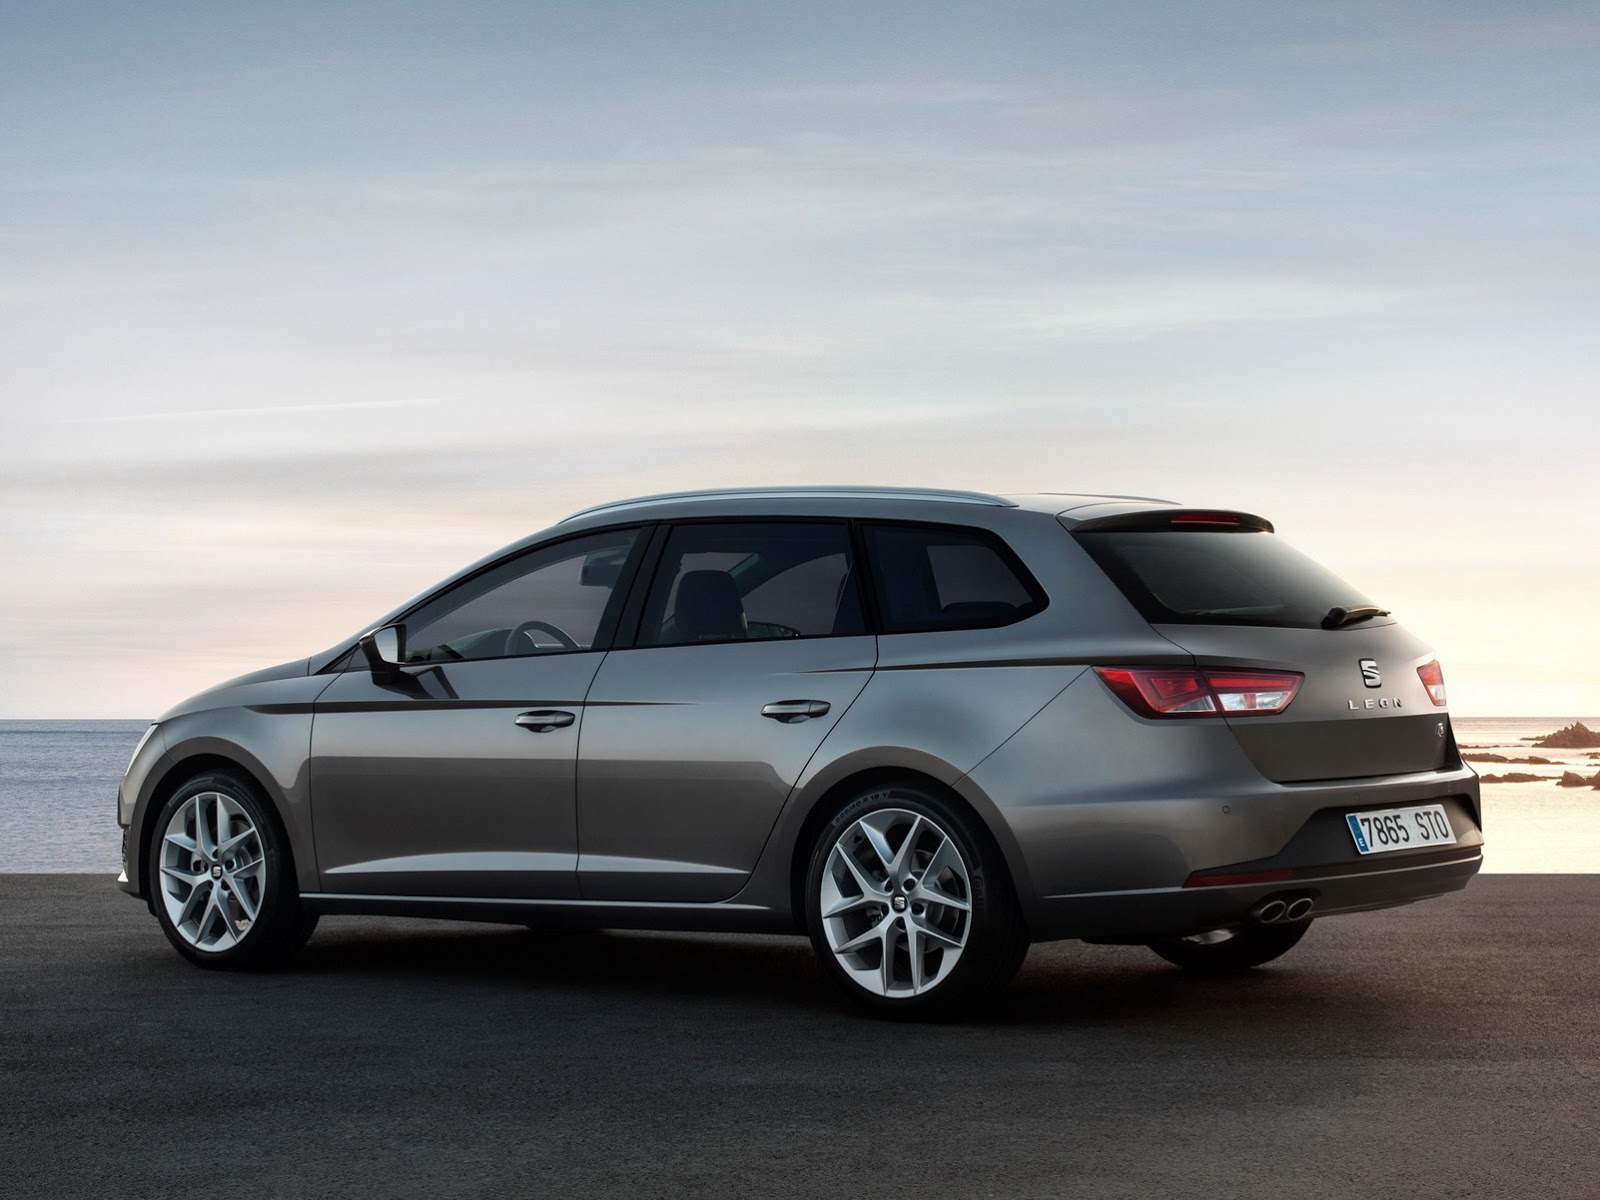 FIRST OFFICIAL PHOTOS OF NEW SEAT LEON ST COMPACT ESTATE